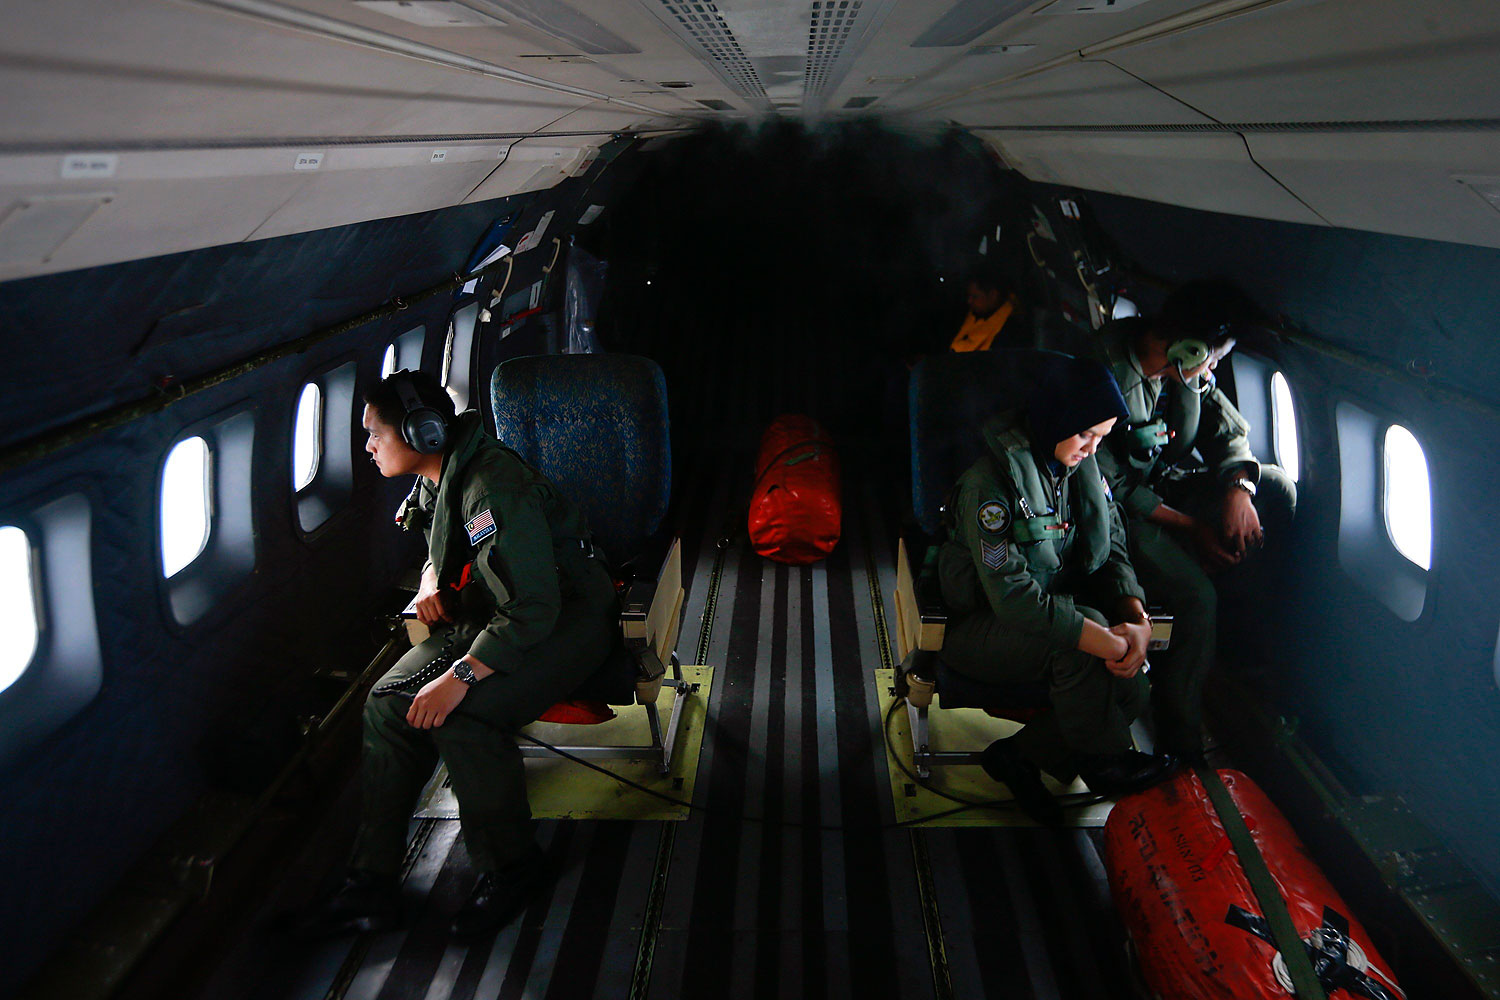 Crew members from the Royal Malaysian Air Force look through windows of a Malaysian Air Force CN235 aircraft during a Search and Rescue  operation to find the missing Malaysia Airlines flight MH370, in the Straits of Malacca, March 13, 2014. 